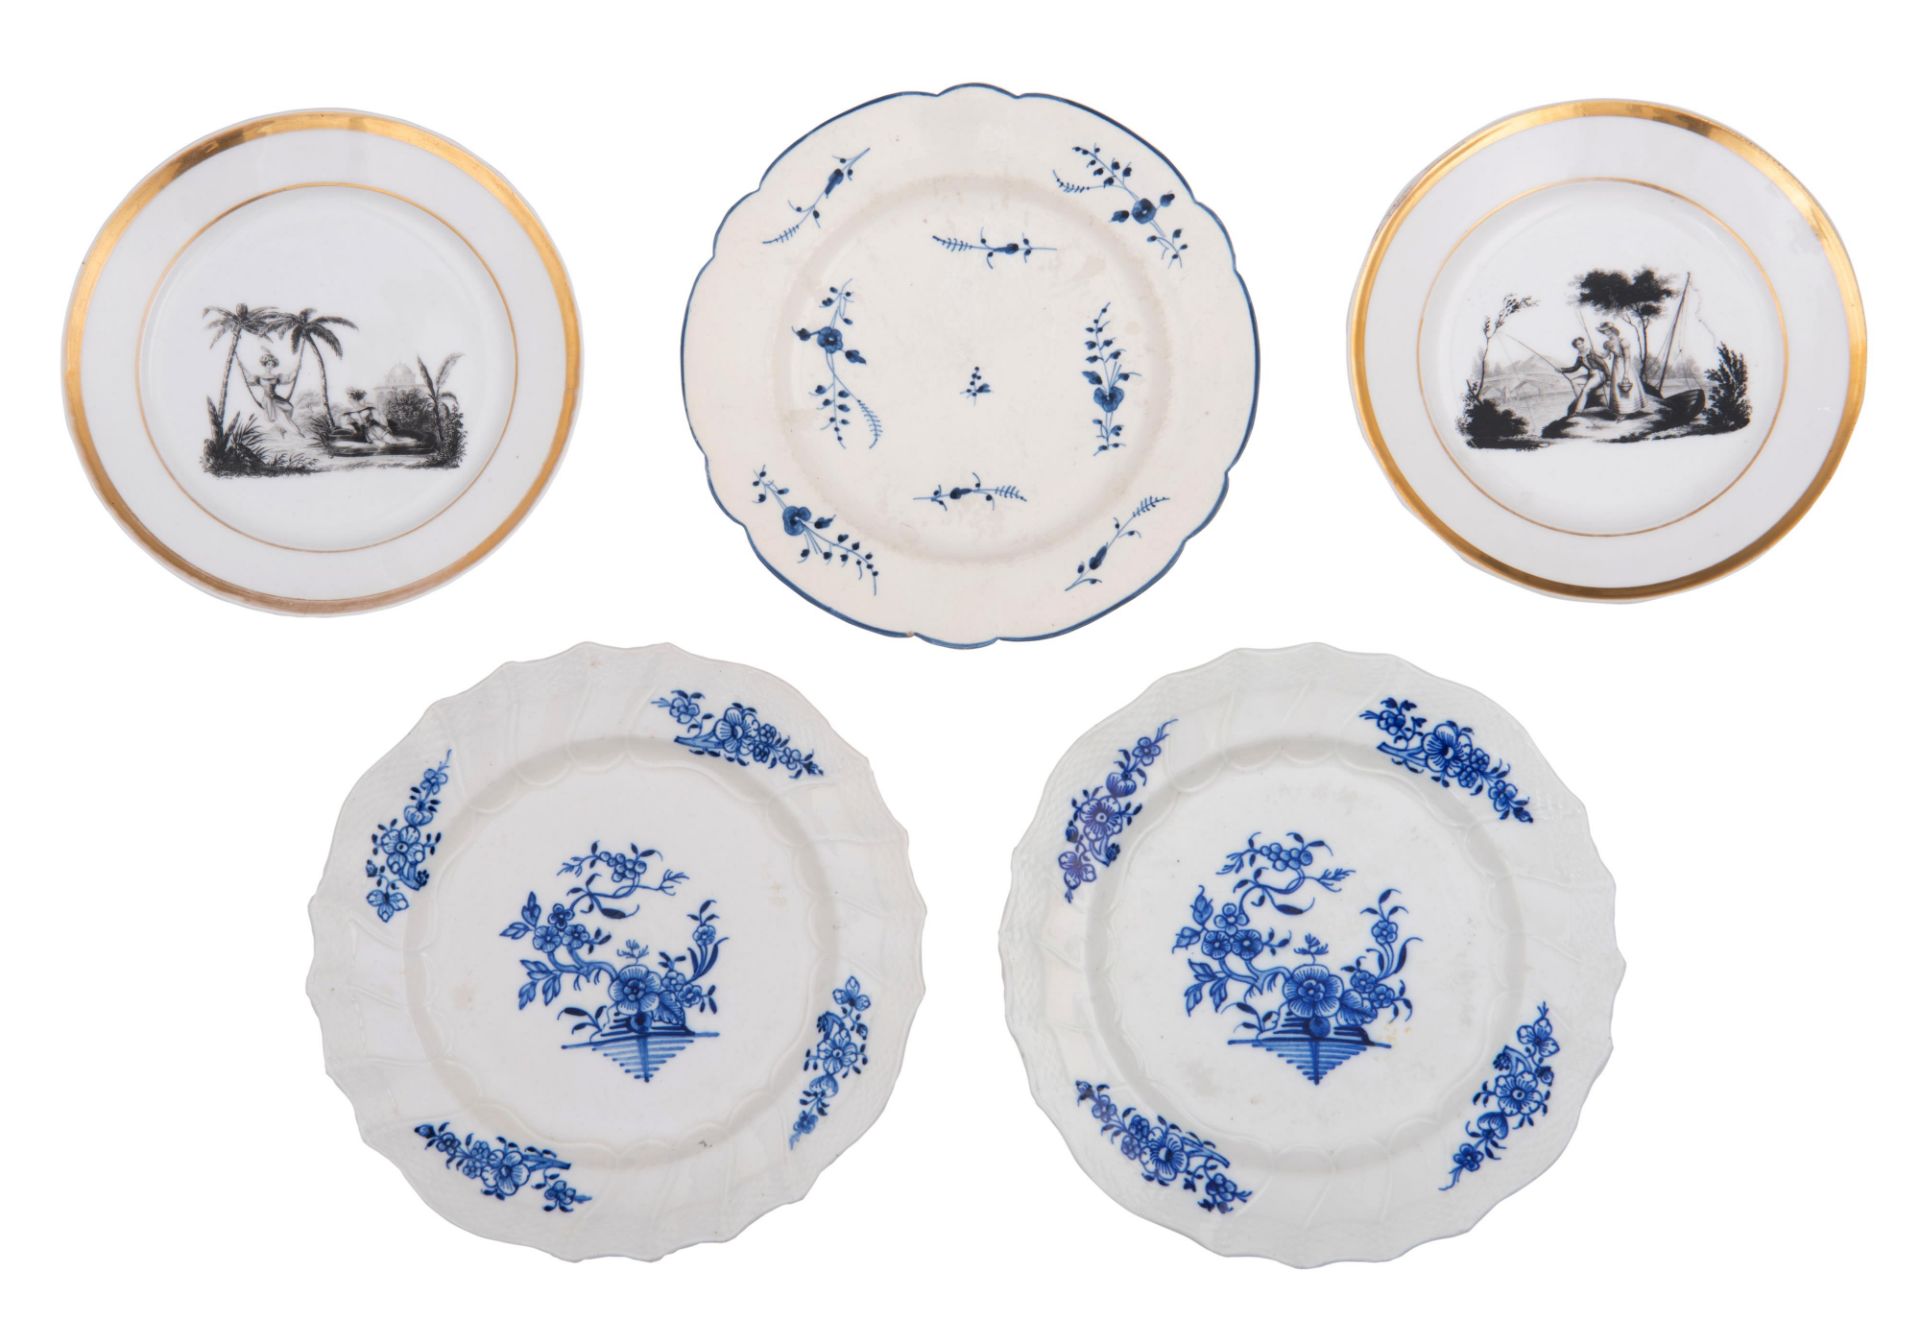 Two gilt decorated porcelain dishes, with a very fine hand-painted grisaille depicting gallant scene